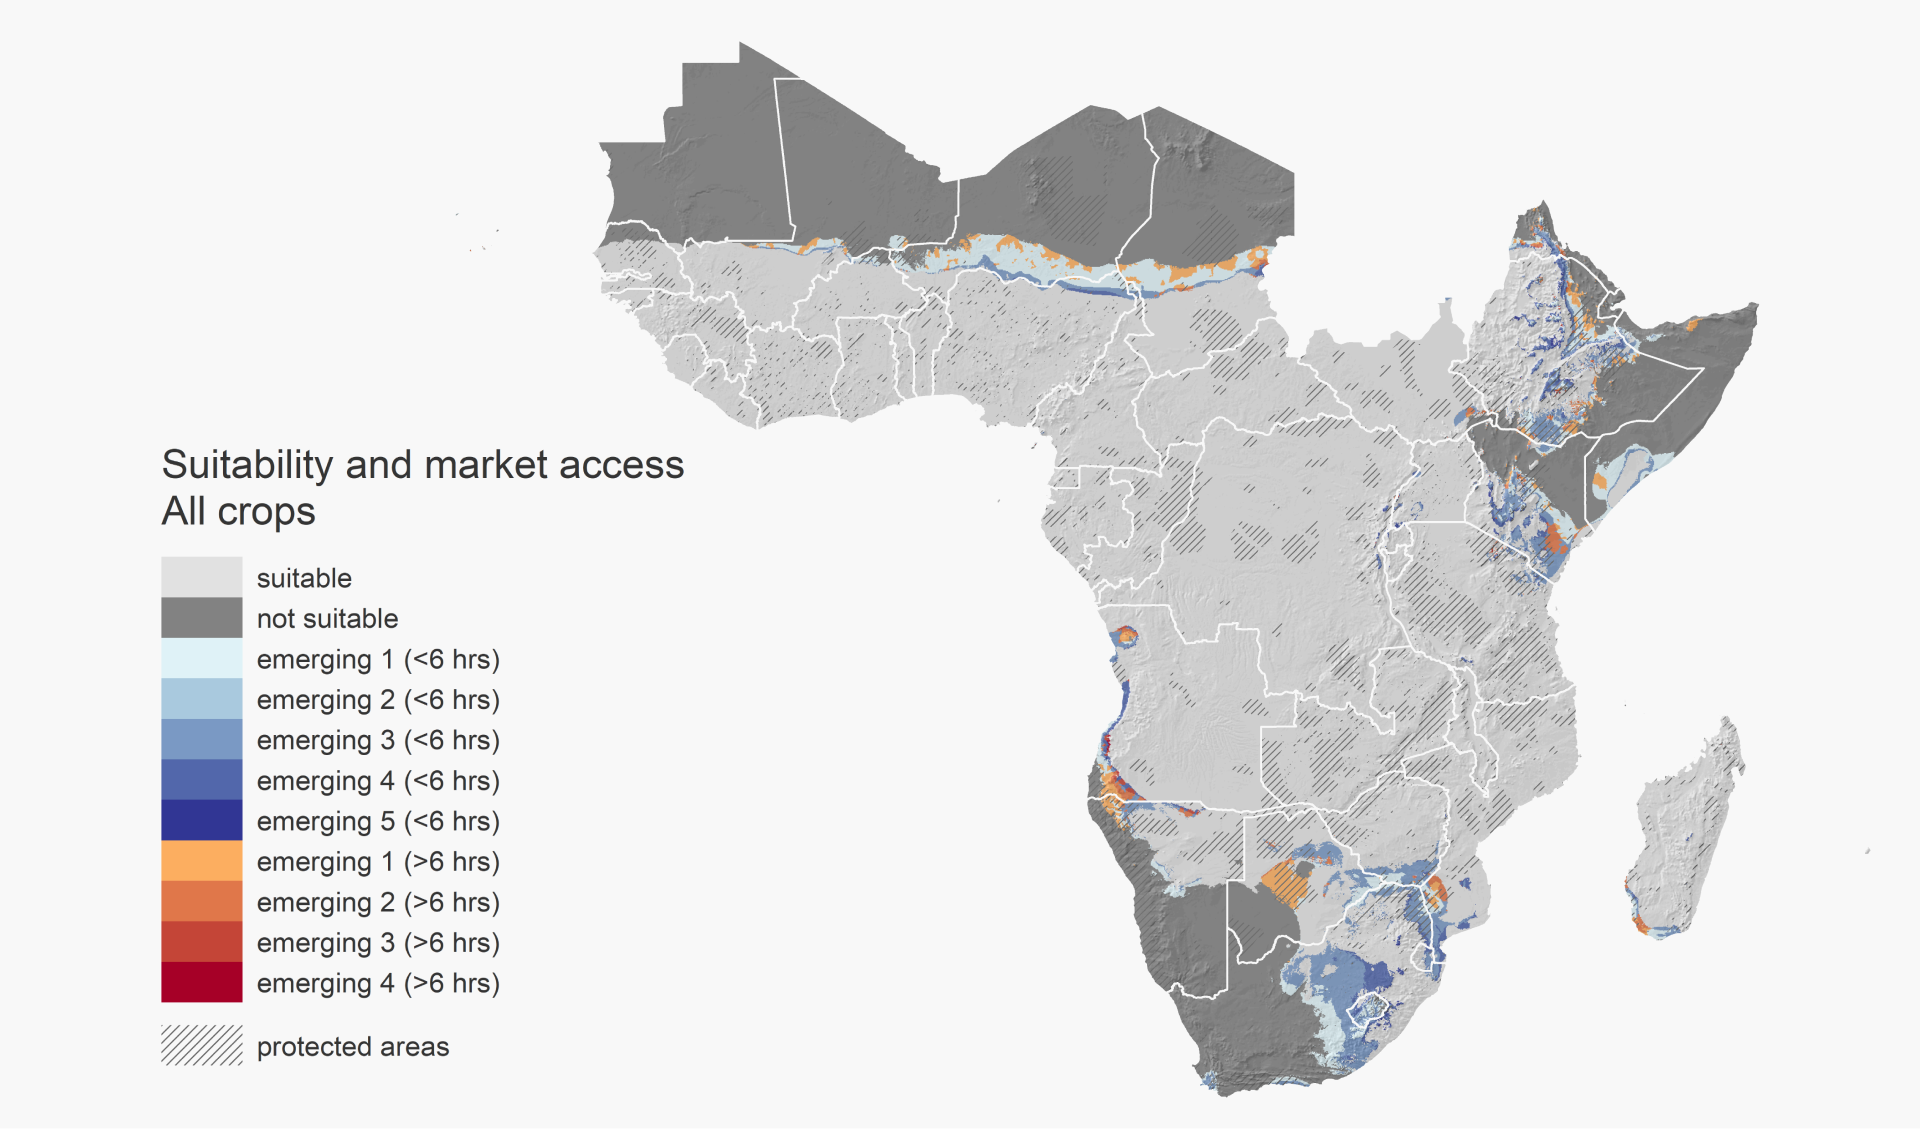 Data Insight 7, Map 1: Suitability and market access of all crops